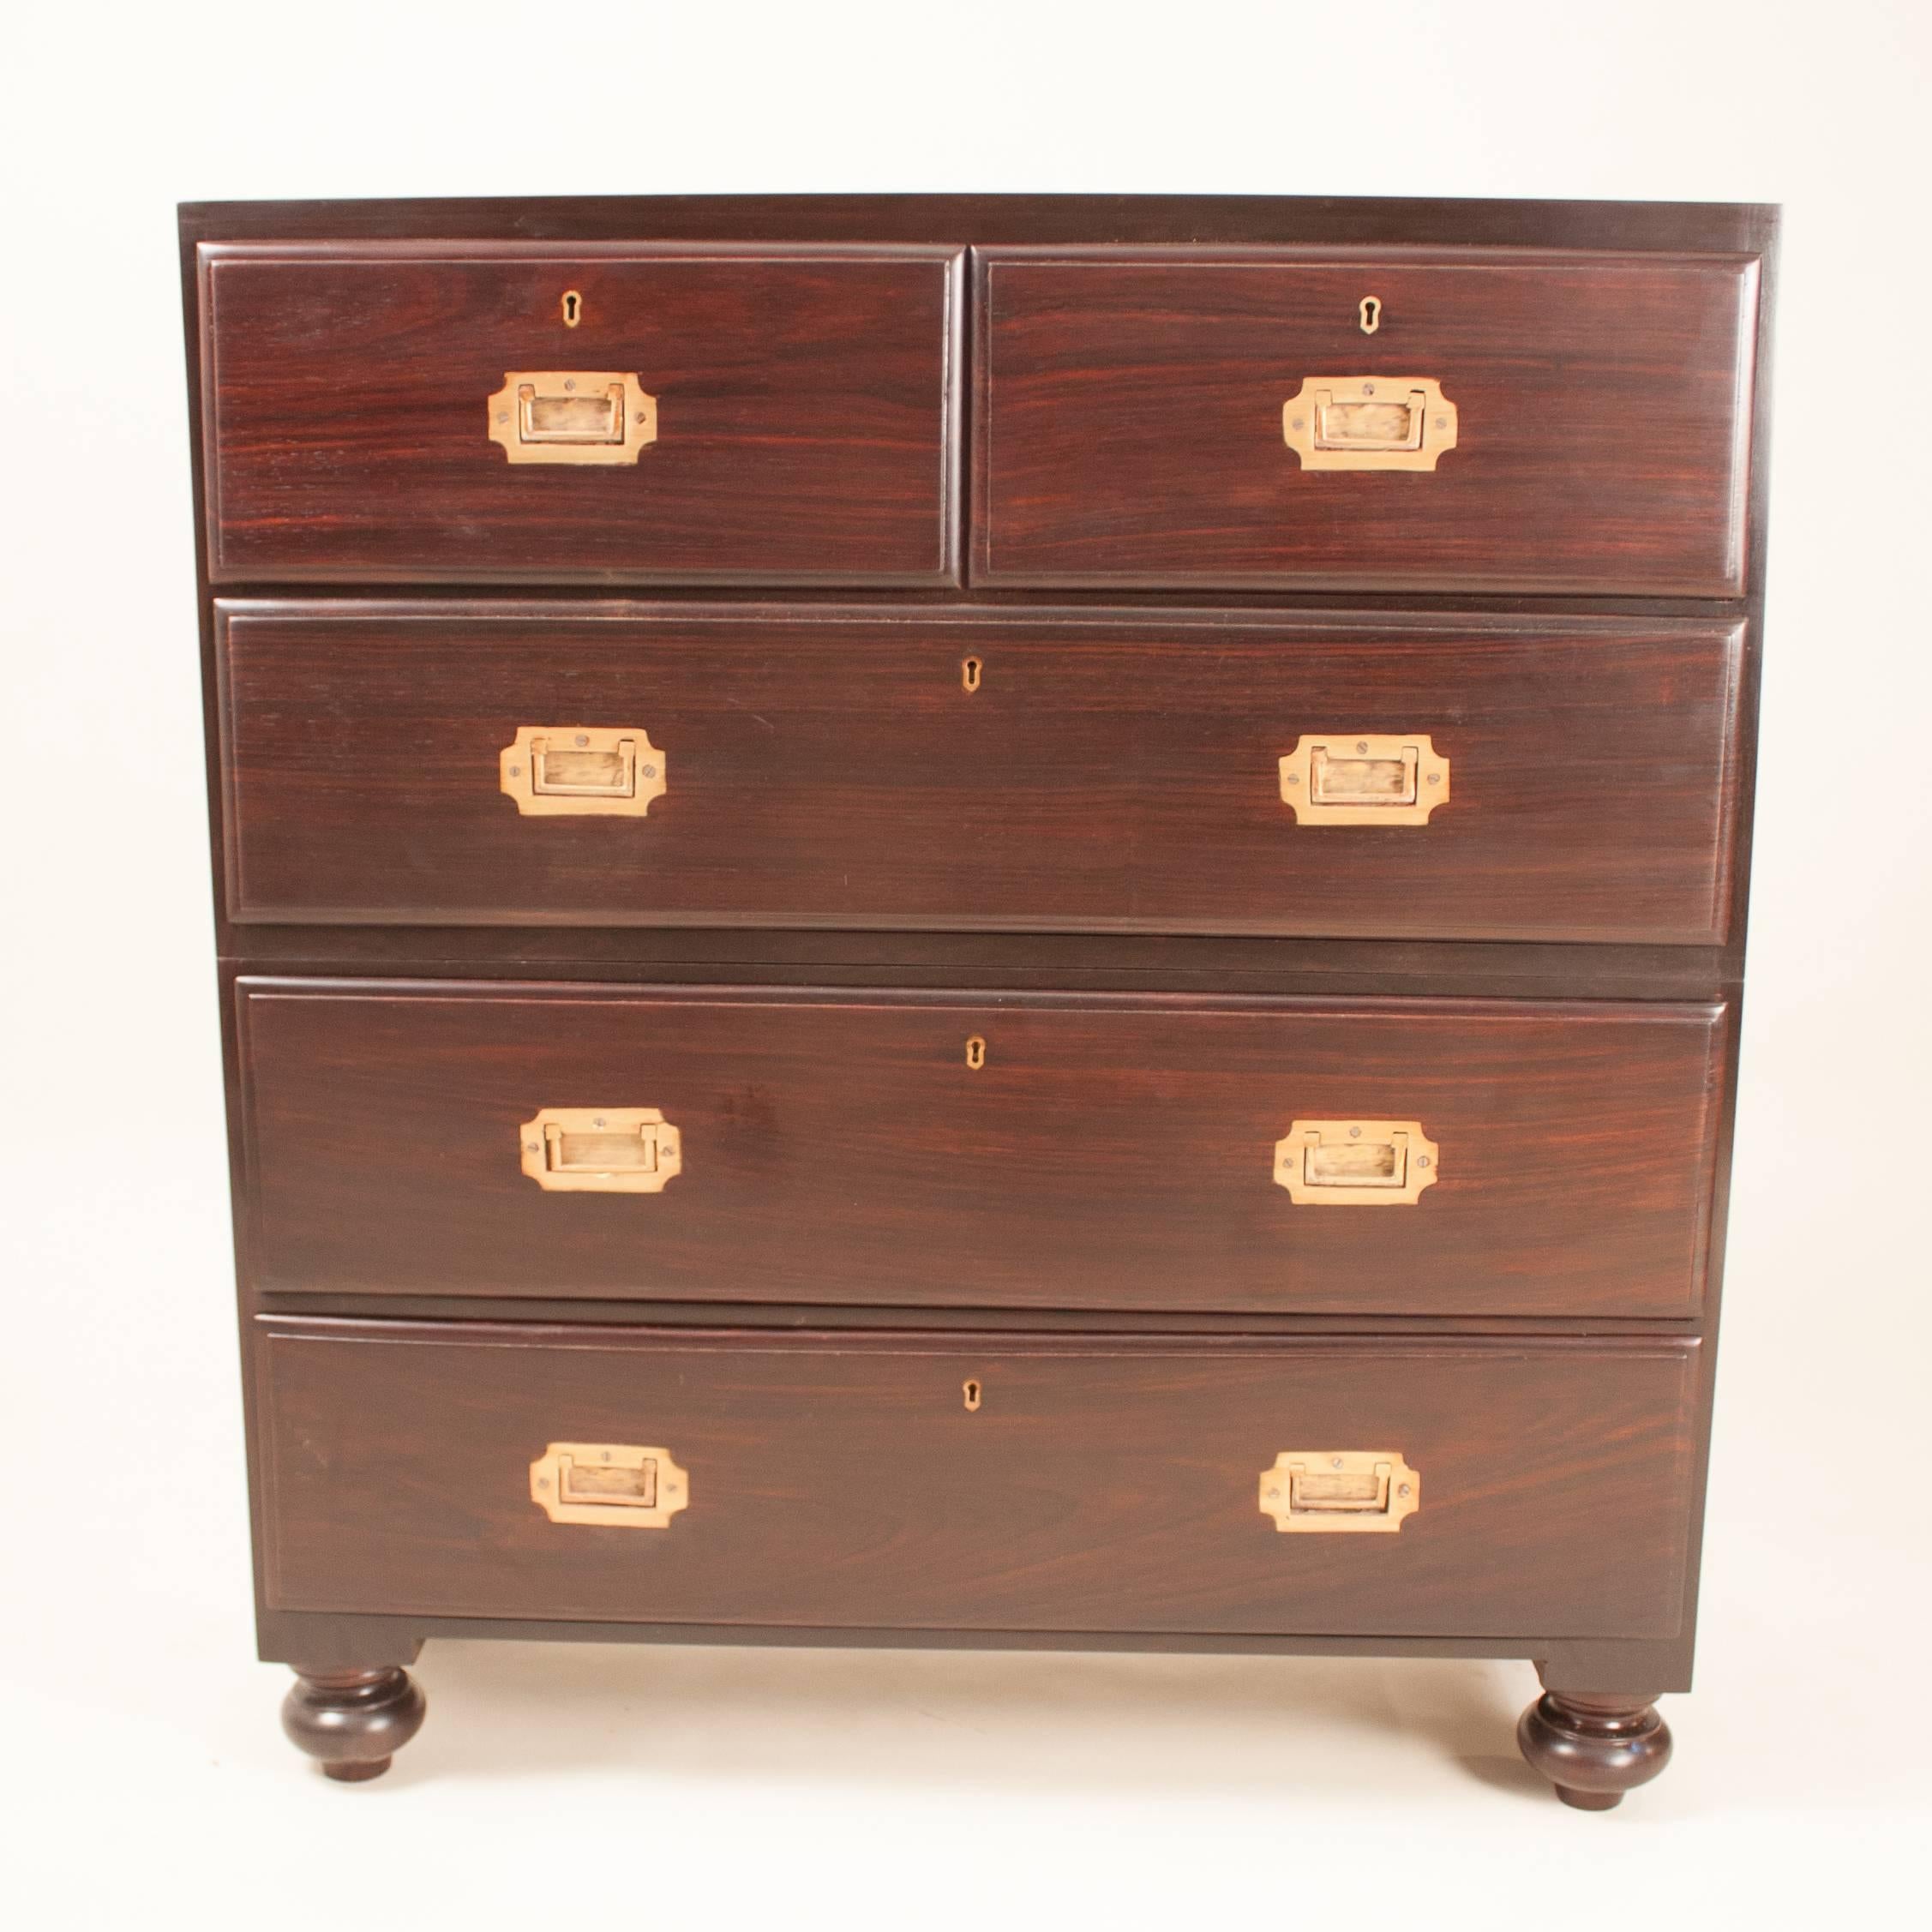 Petite British Colonial Campaign chest of drawers, circa 1920, in solid rosewood with inset brass drawer pulls. This classic dresser, which is in two parts for ease of transport, has been attentively restored. Each of the five drawers slides